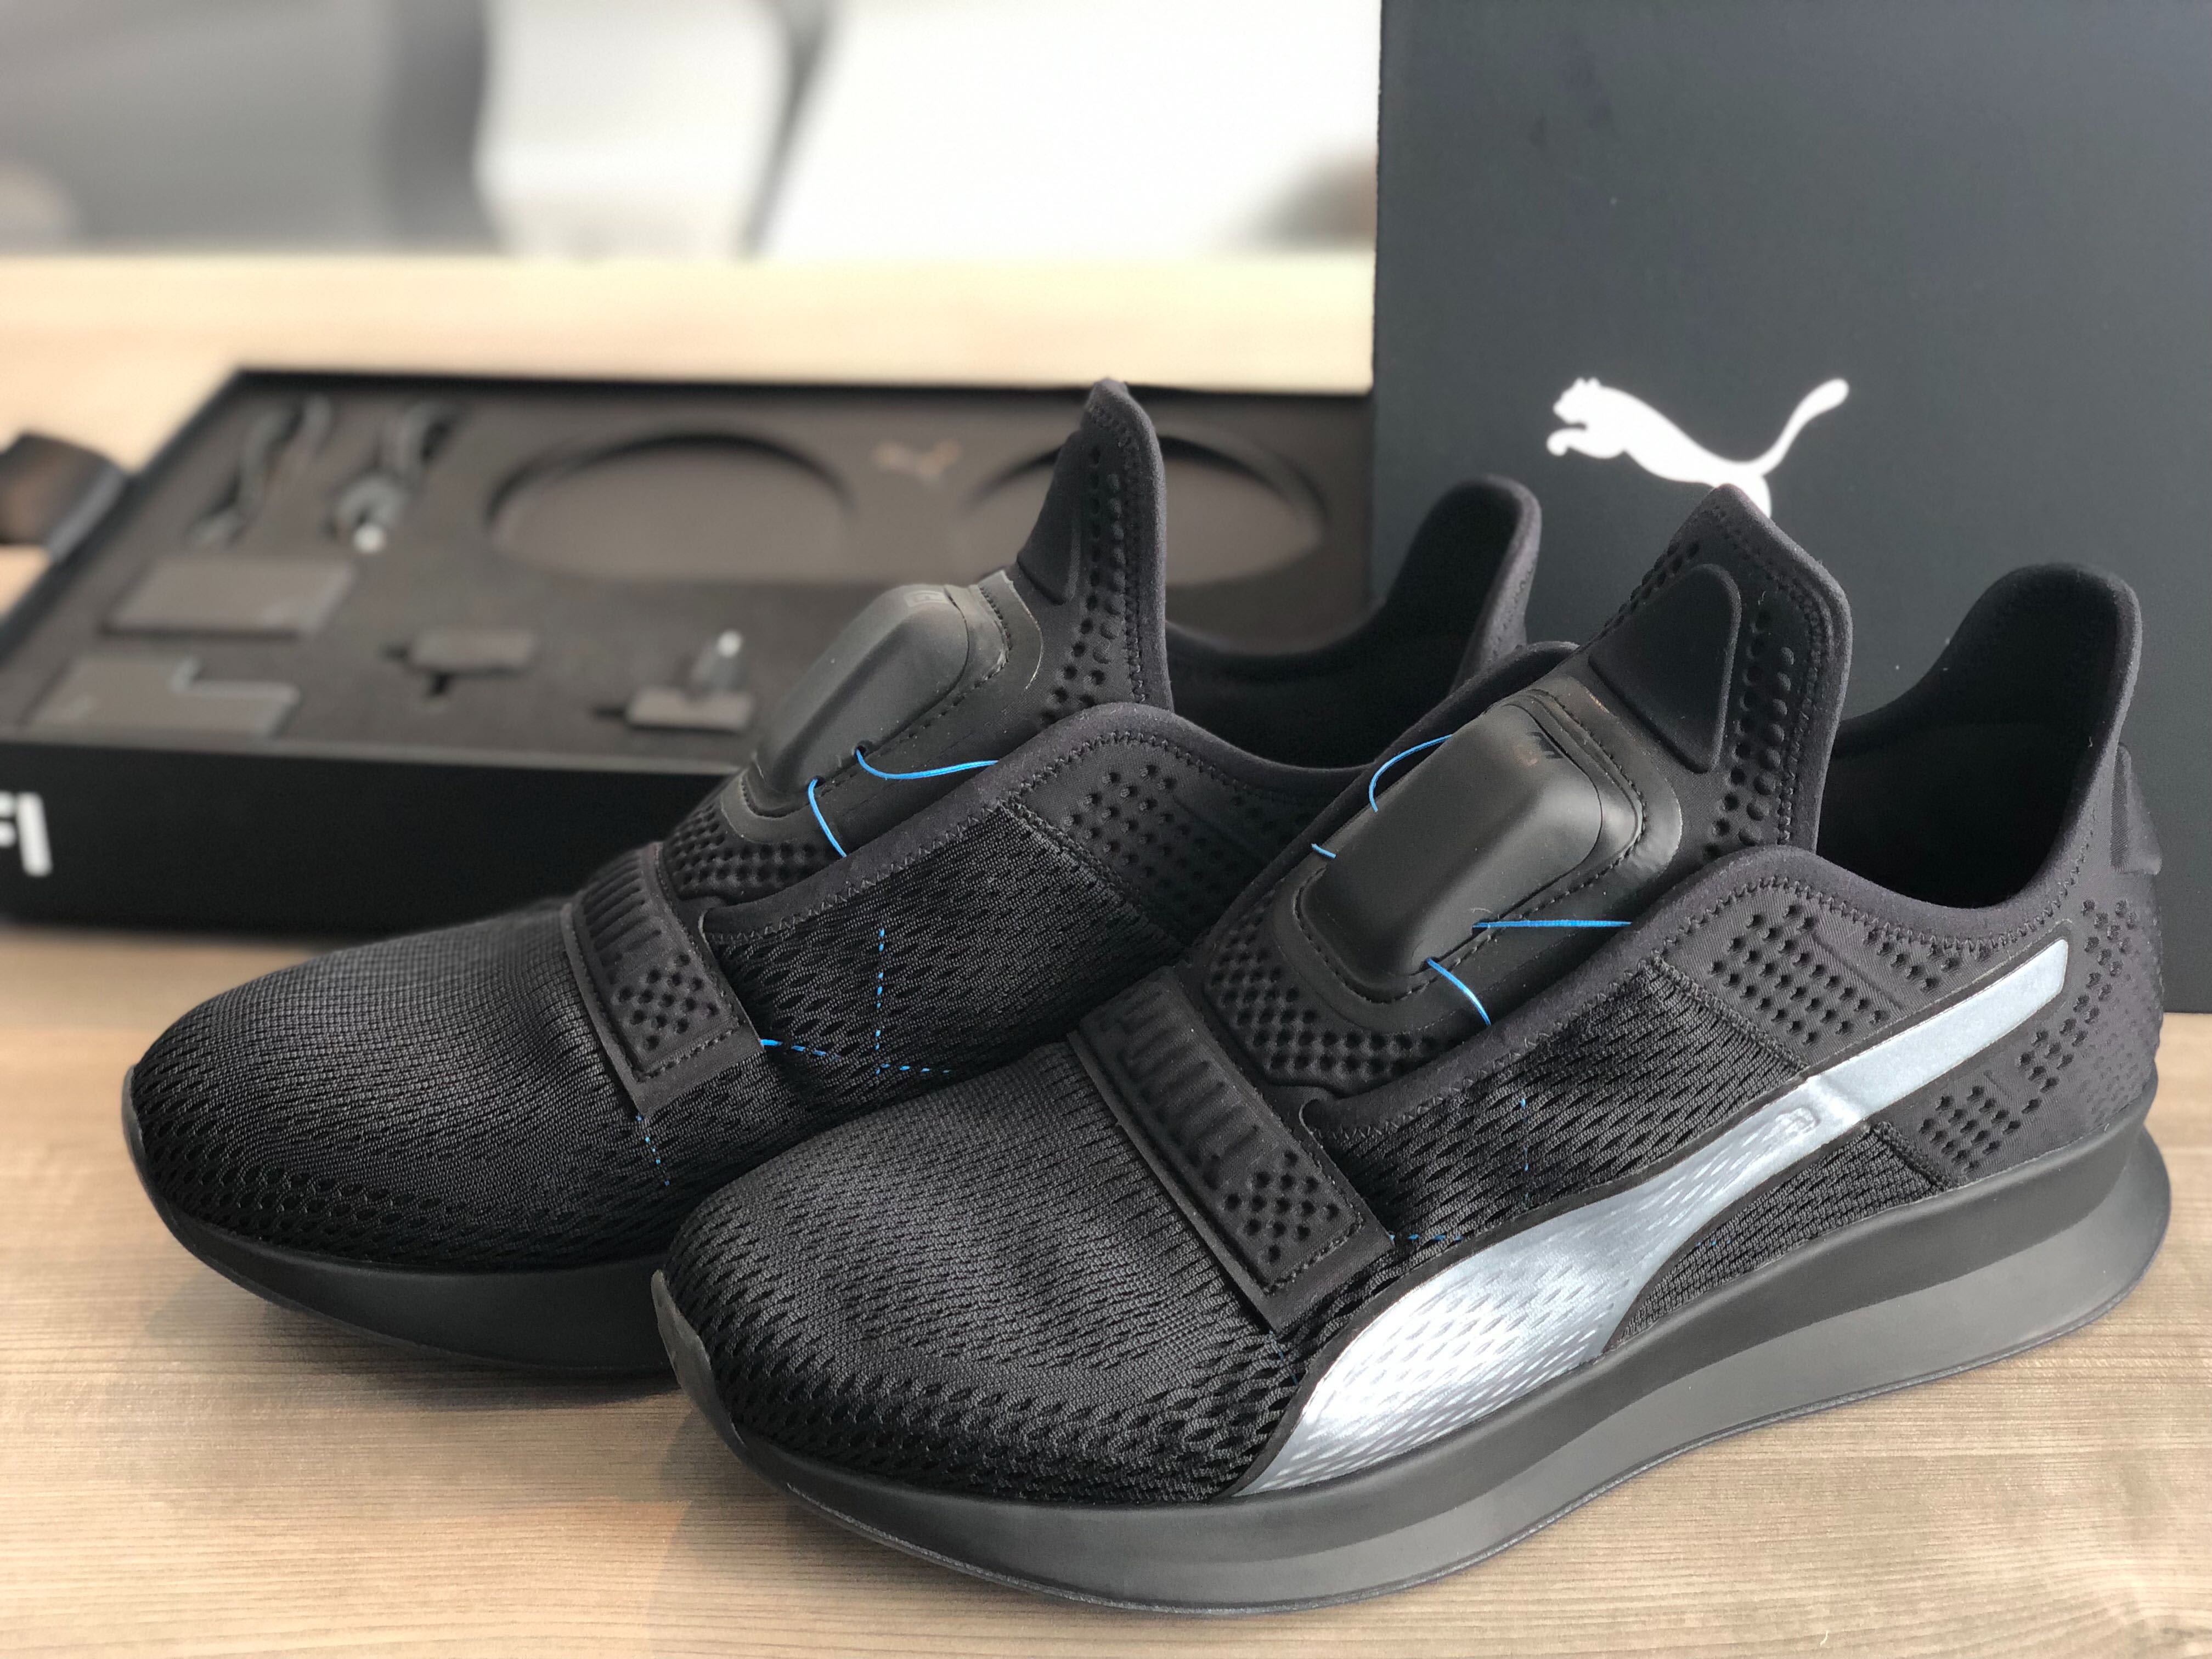 Herbs cigarette Apple High tech shoes: Puma to release self-lacing sneakers to take on Nike